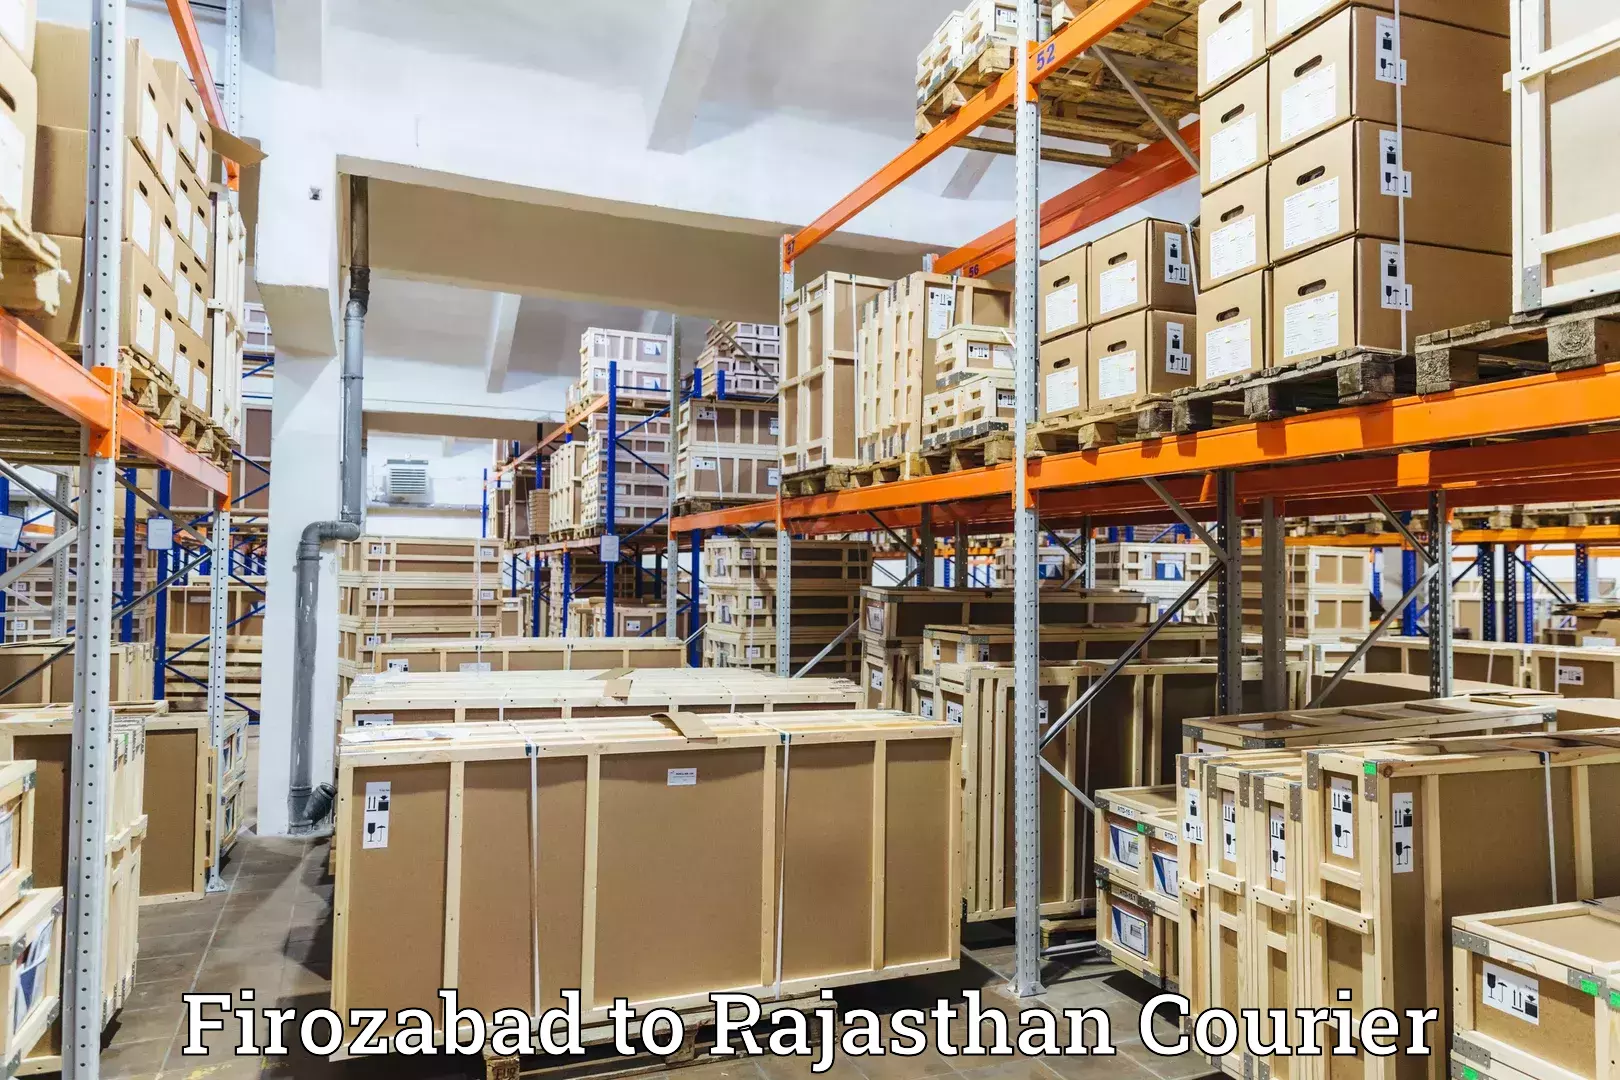 Nationwide delivery network Firozabad to Rajasthan